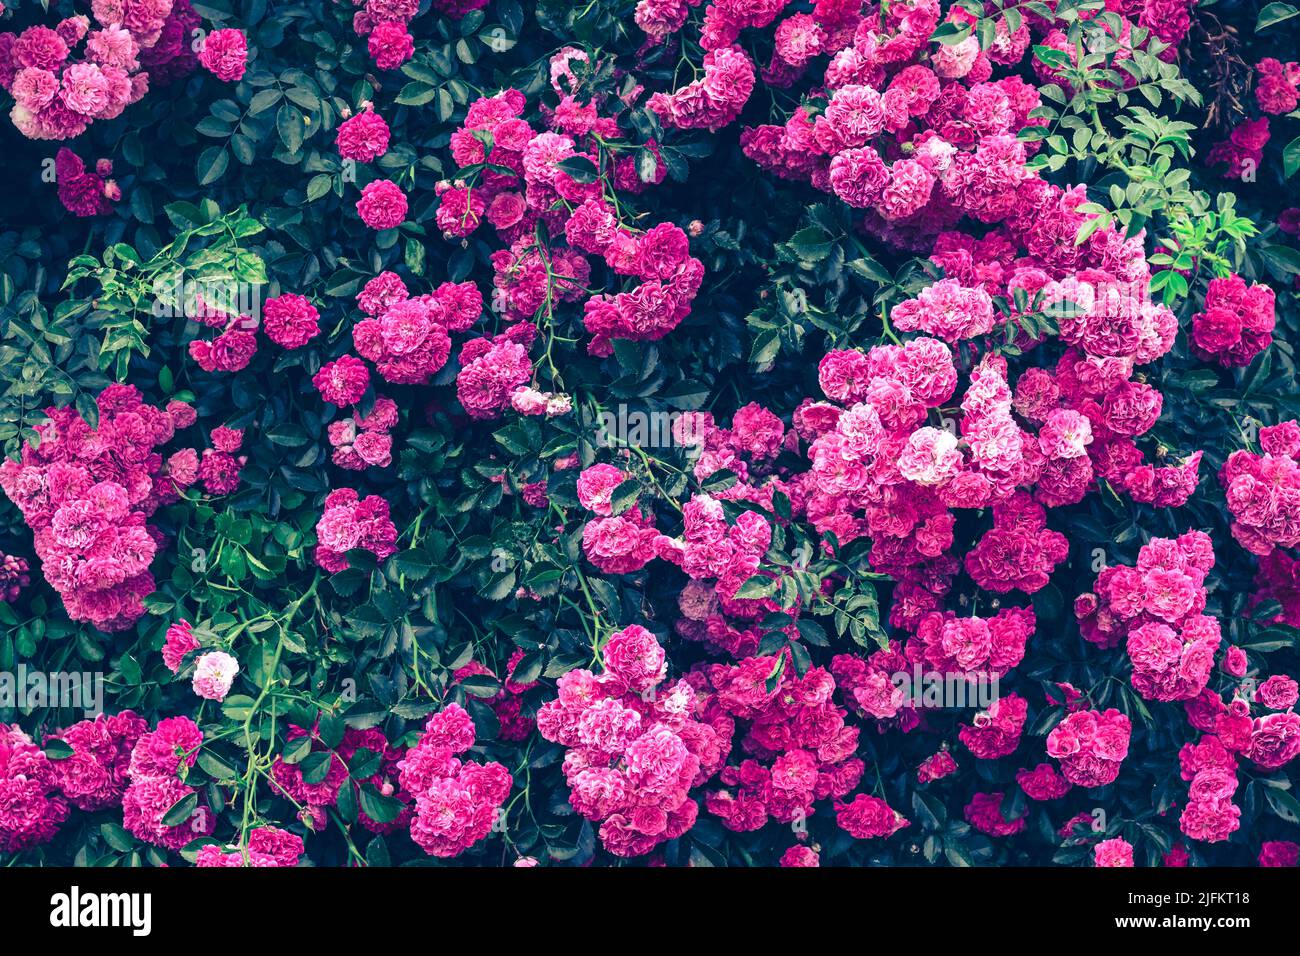 Pink flowers in the garden. Background of bush roses. Texture of greenery. Beautiful bright colors. Template for greeting card, postcard design. Flora Stock Photo